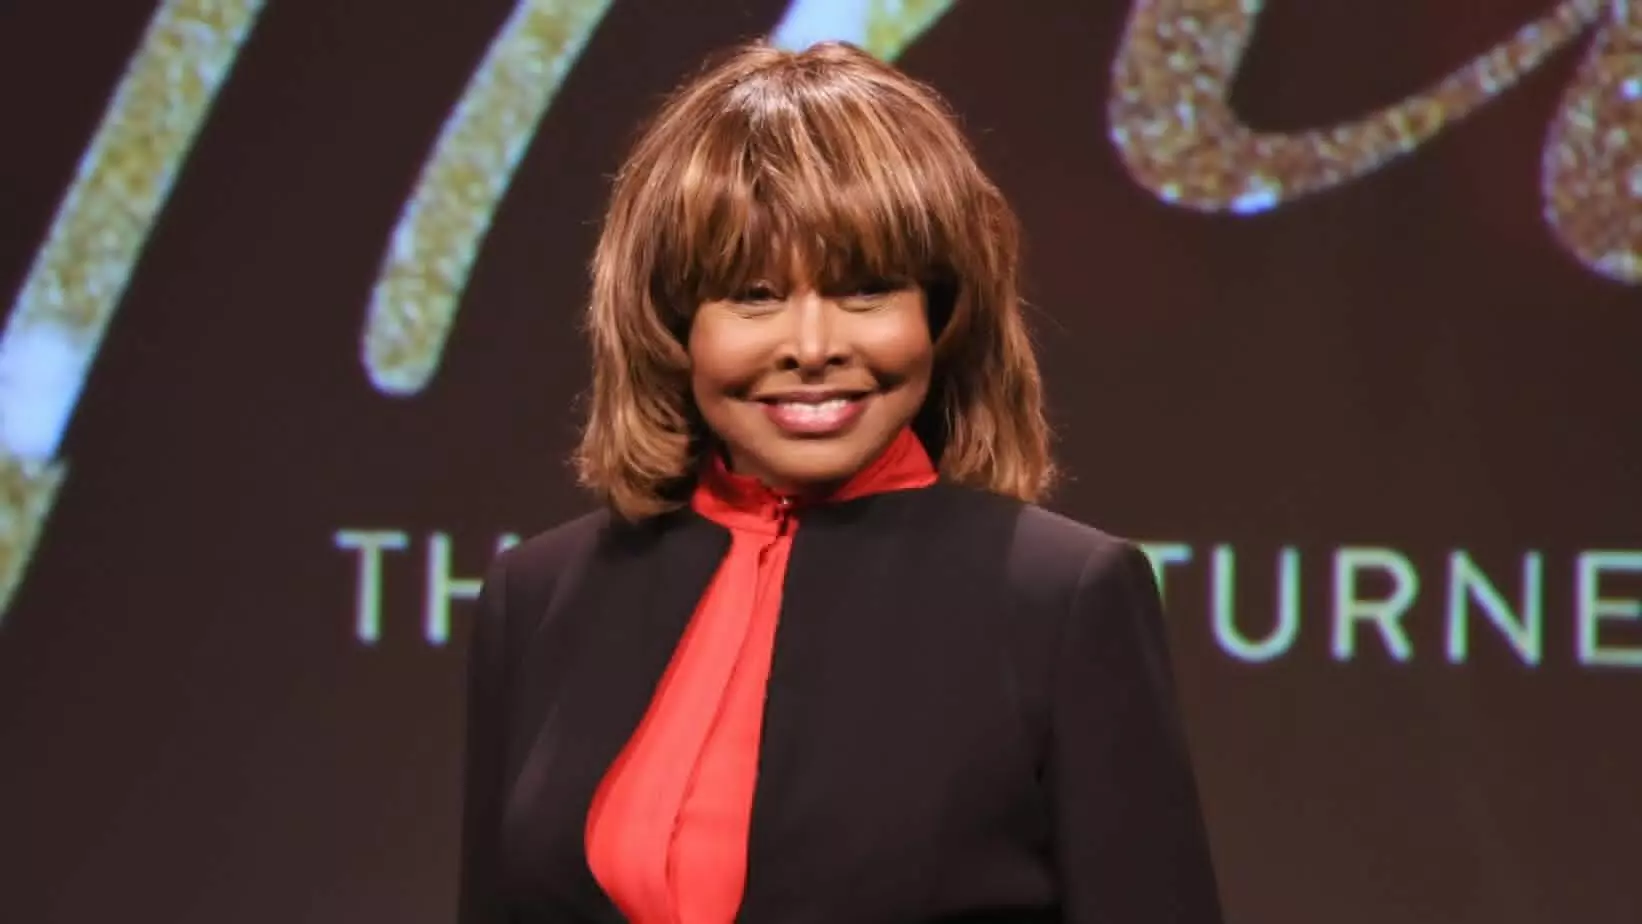 Tina Turner Opens up About Private Life